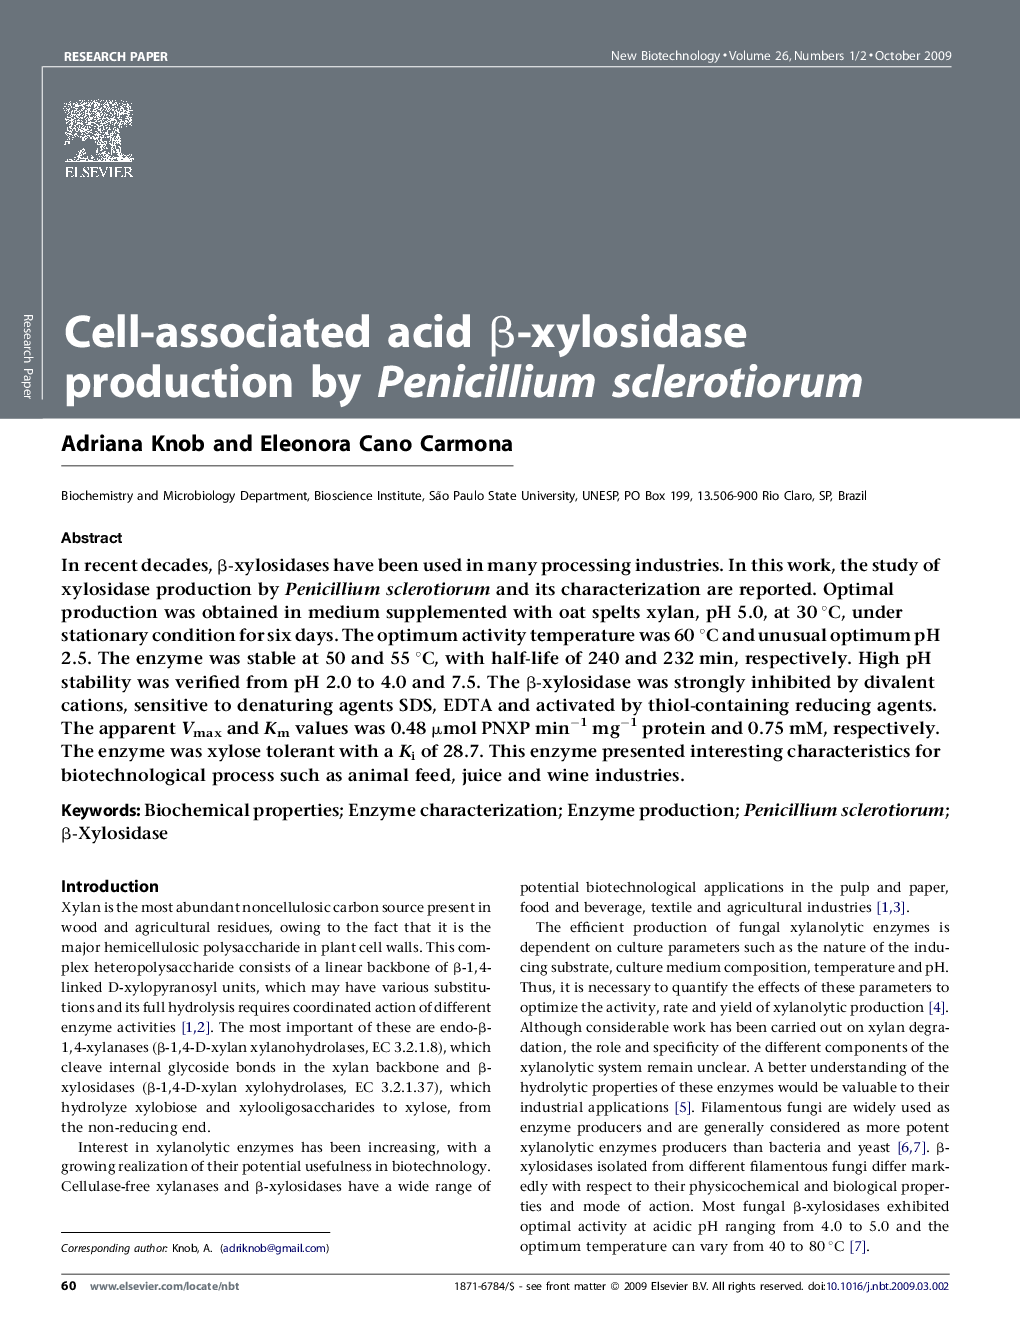 Cell-associated acid β-xylosidase production by Penicillium sclerotiorum